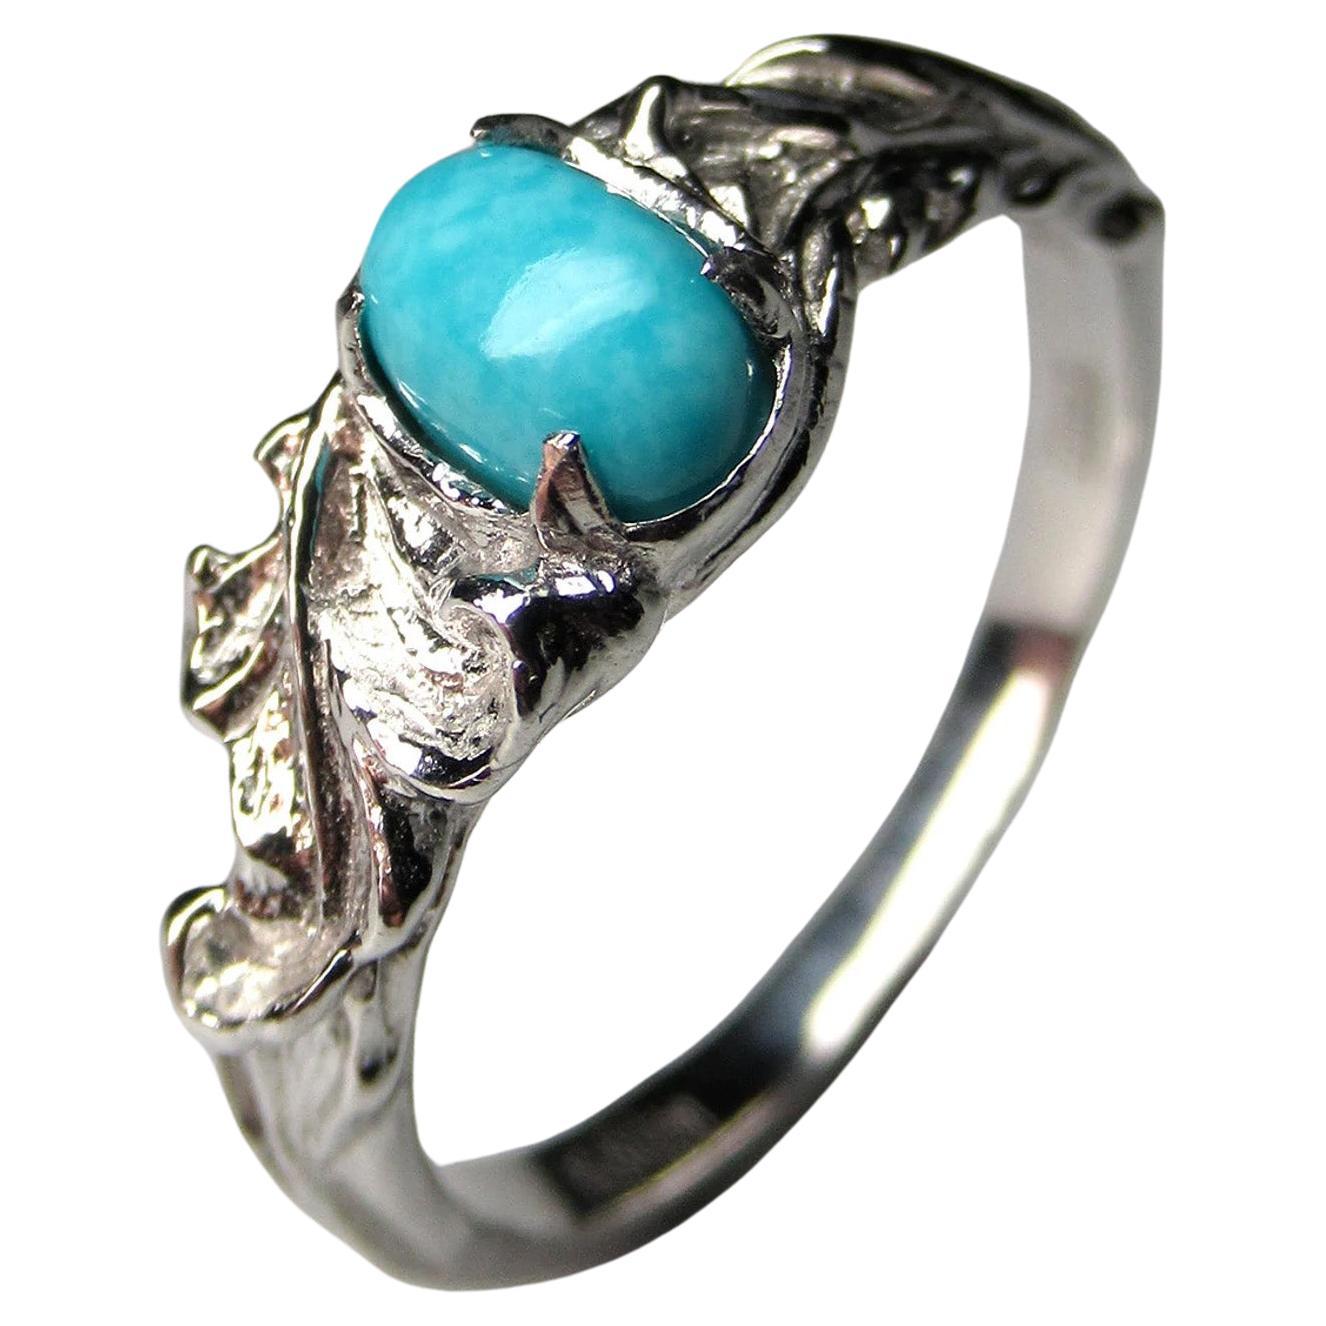 Turquoise Silver Ring Natural Sleeping Beauty Art Nouveau style wedding ring